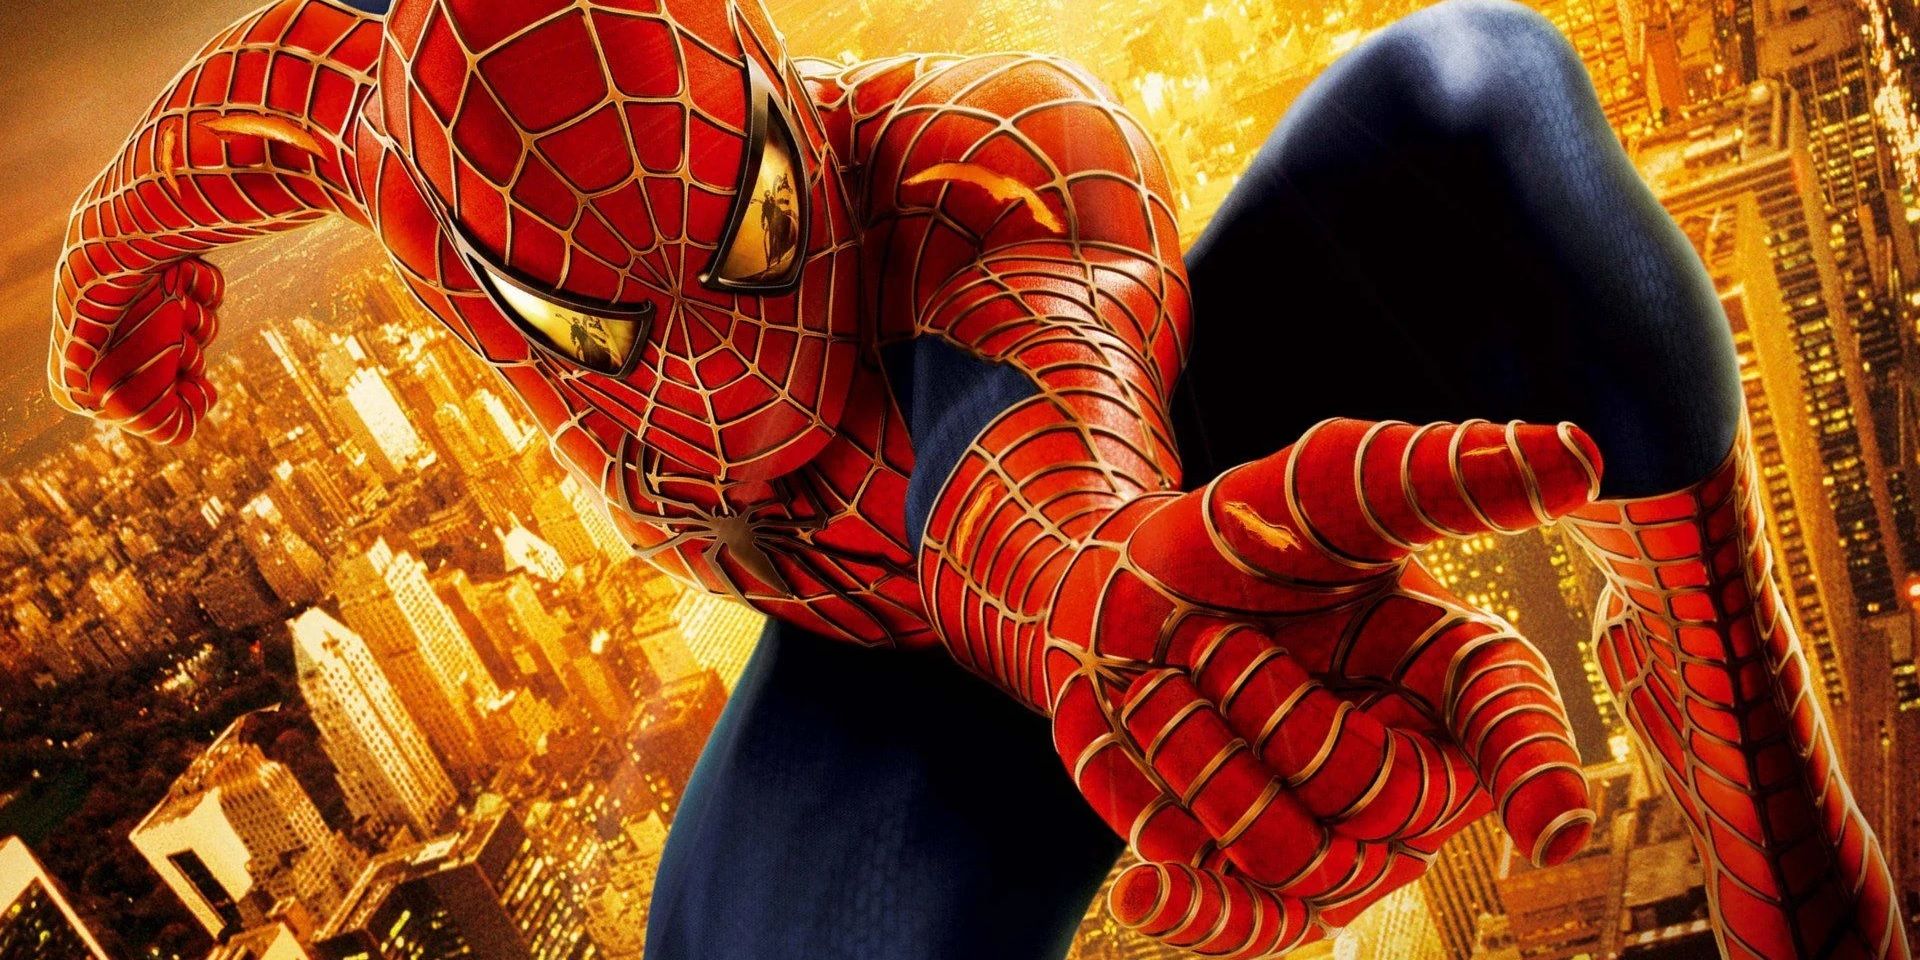 The poster for Spider-Man 2